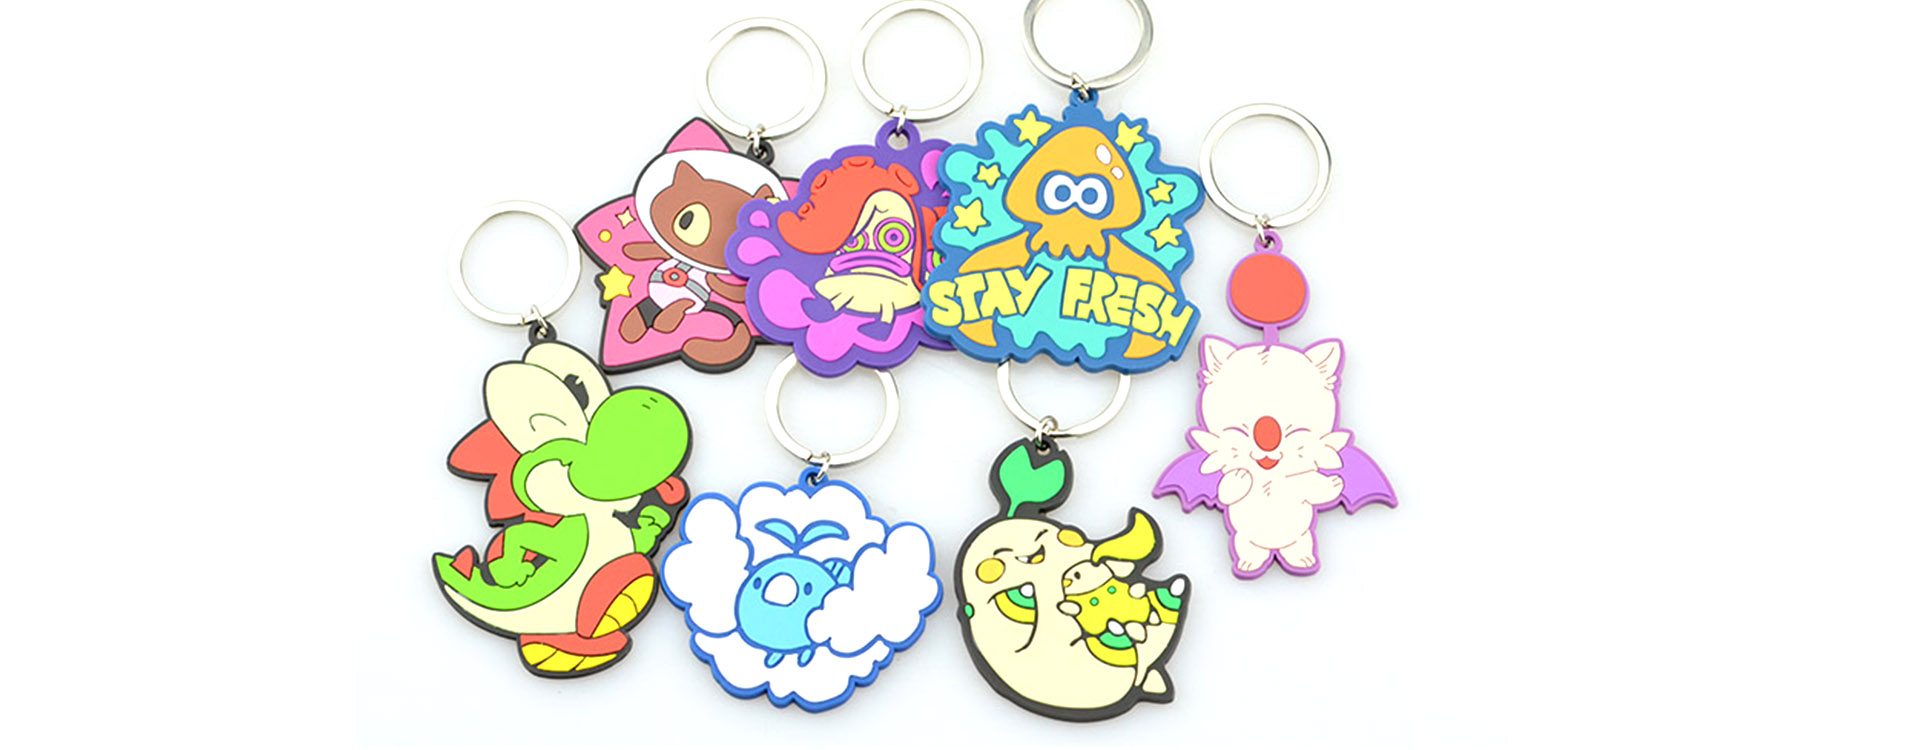 ArtiGifts - Your Go-To Supplier for Custom PVC Keychains of Exceptional Quality